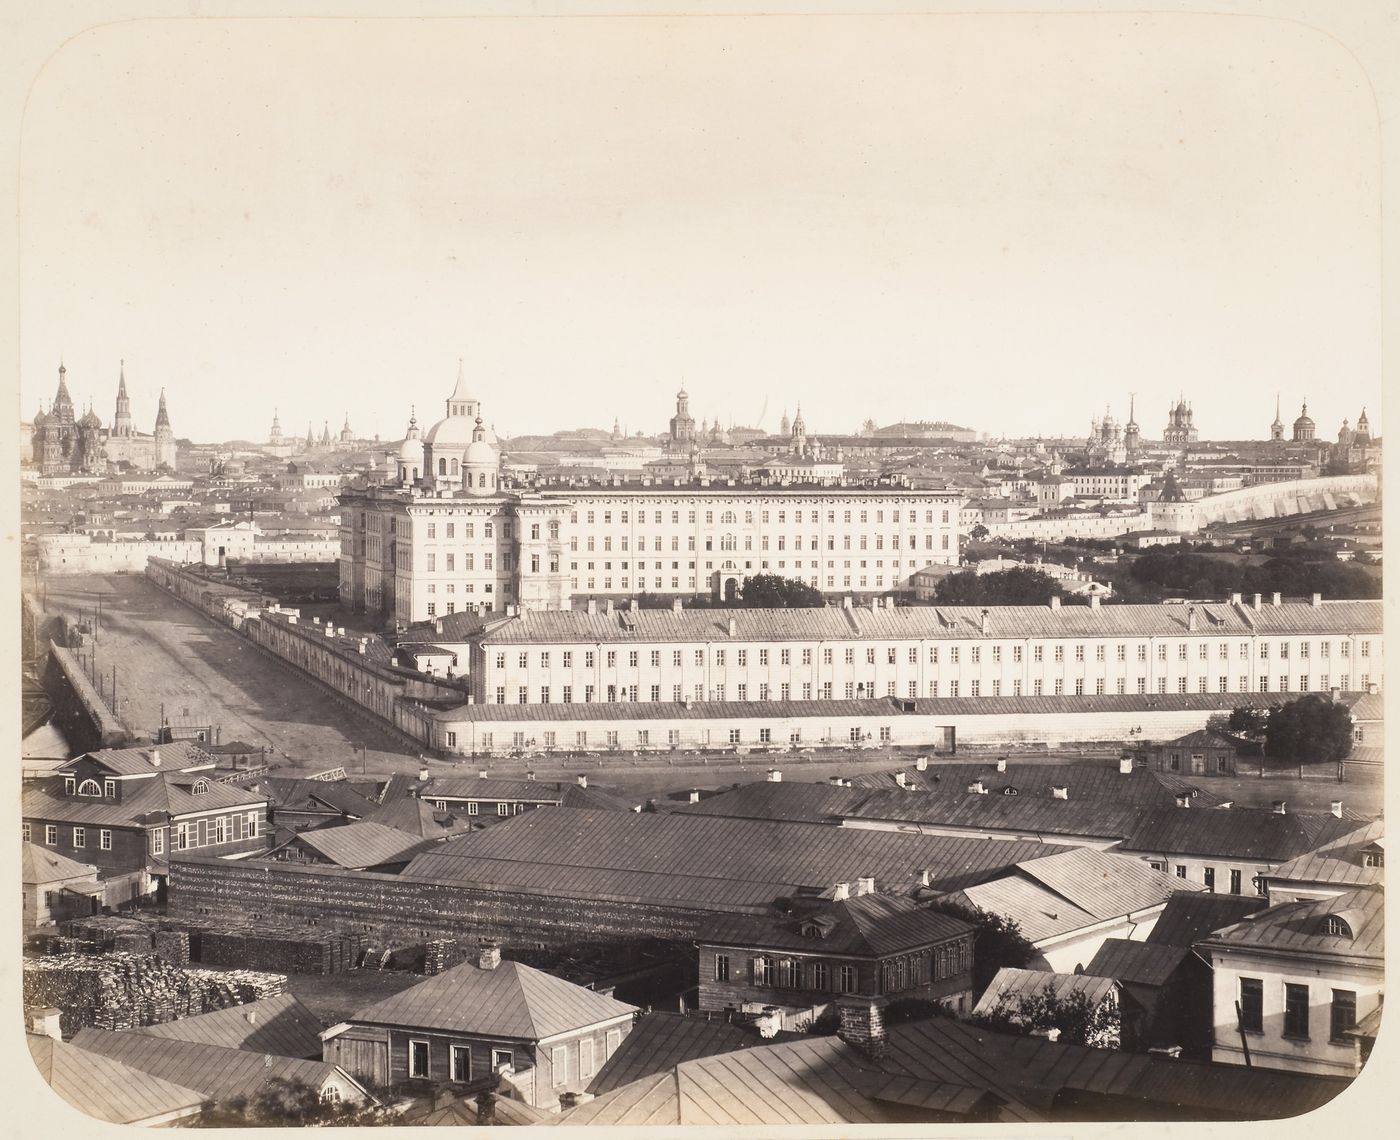 Exterior view of the Vospitatelnyi Dom (Foundling Home), Moscow